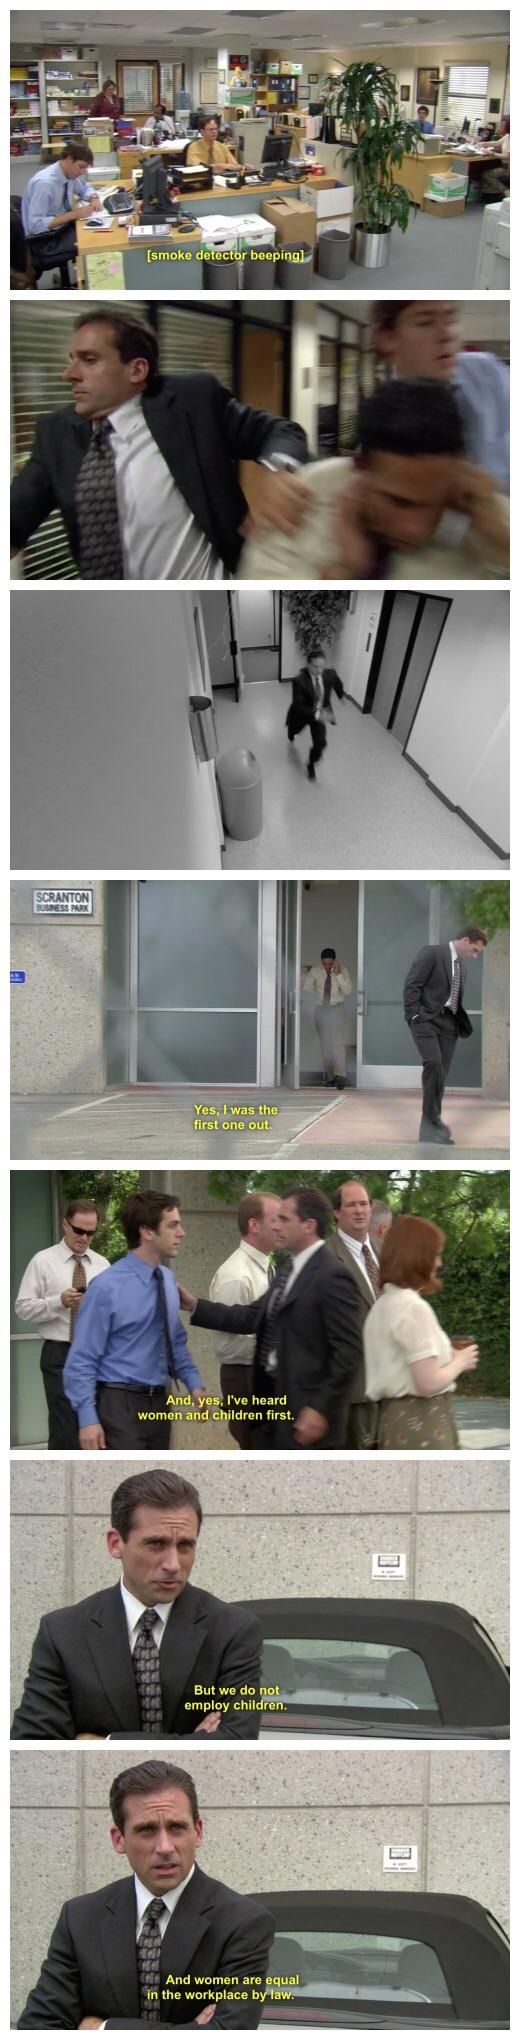 I love The Office